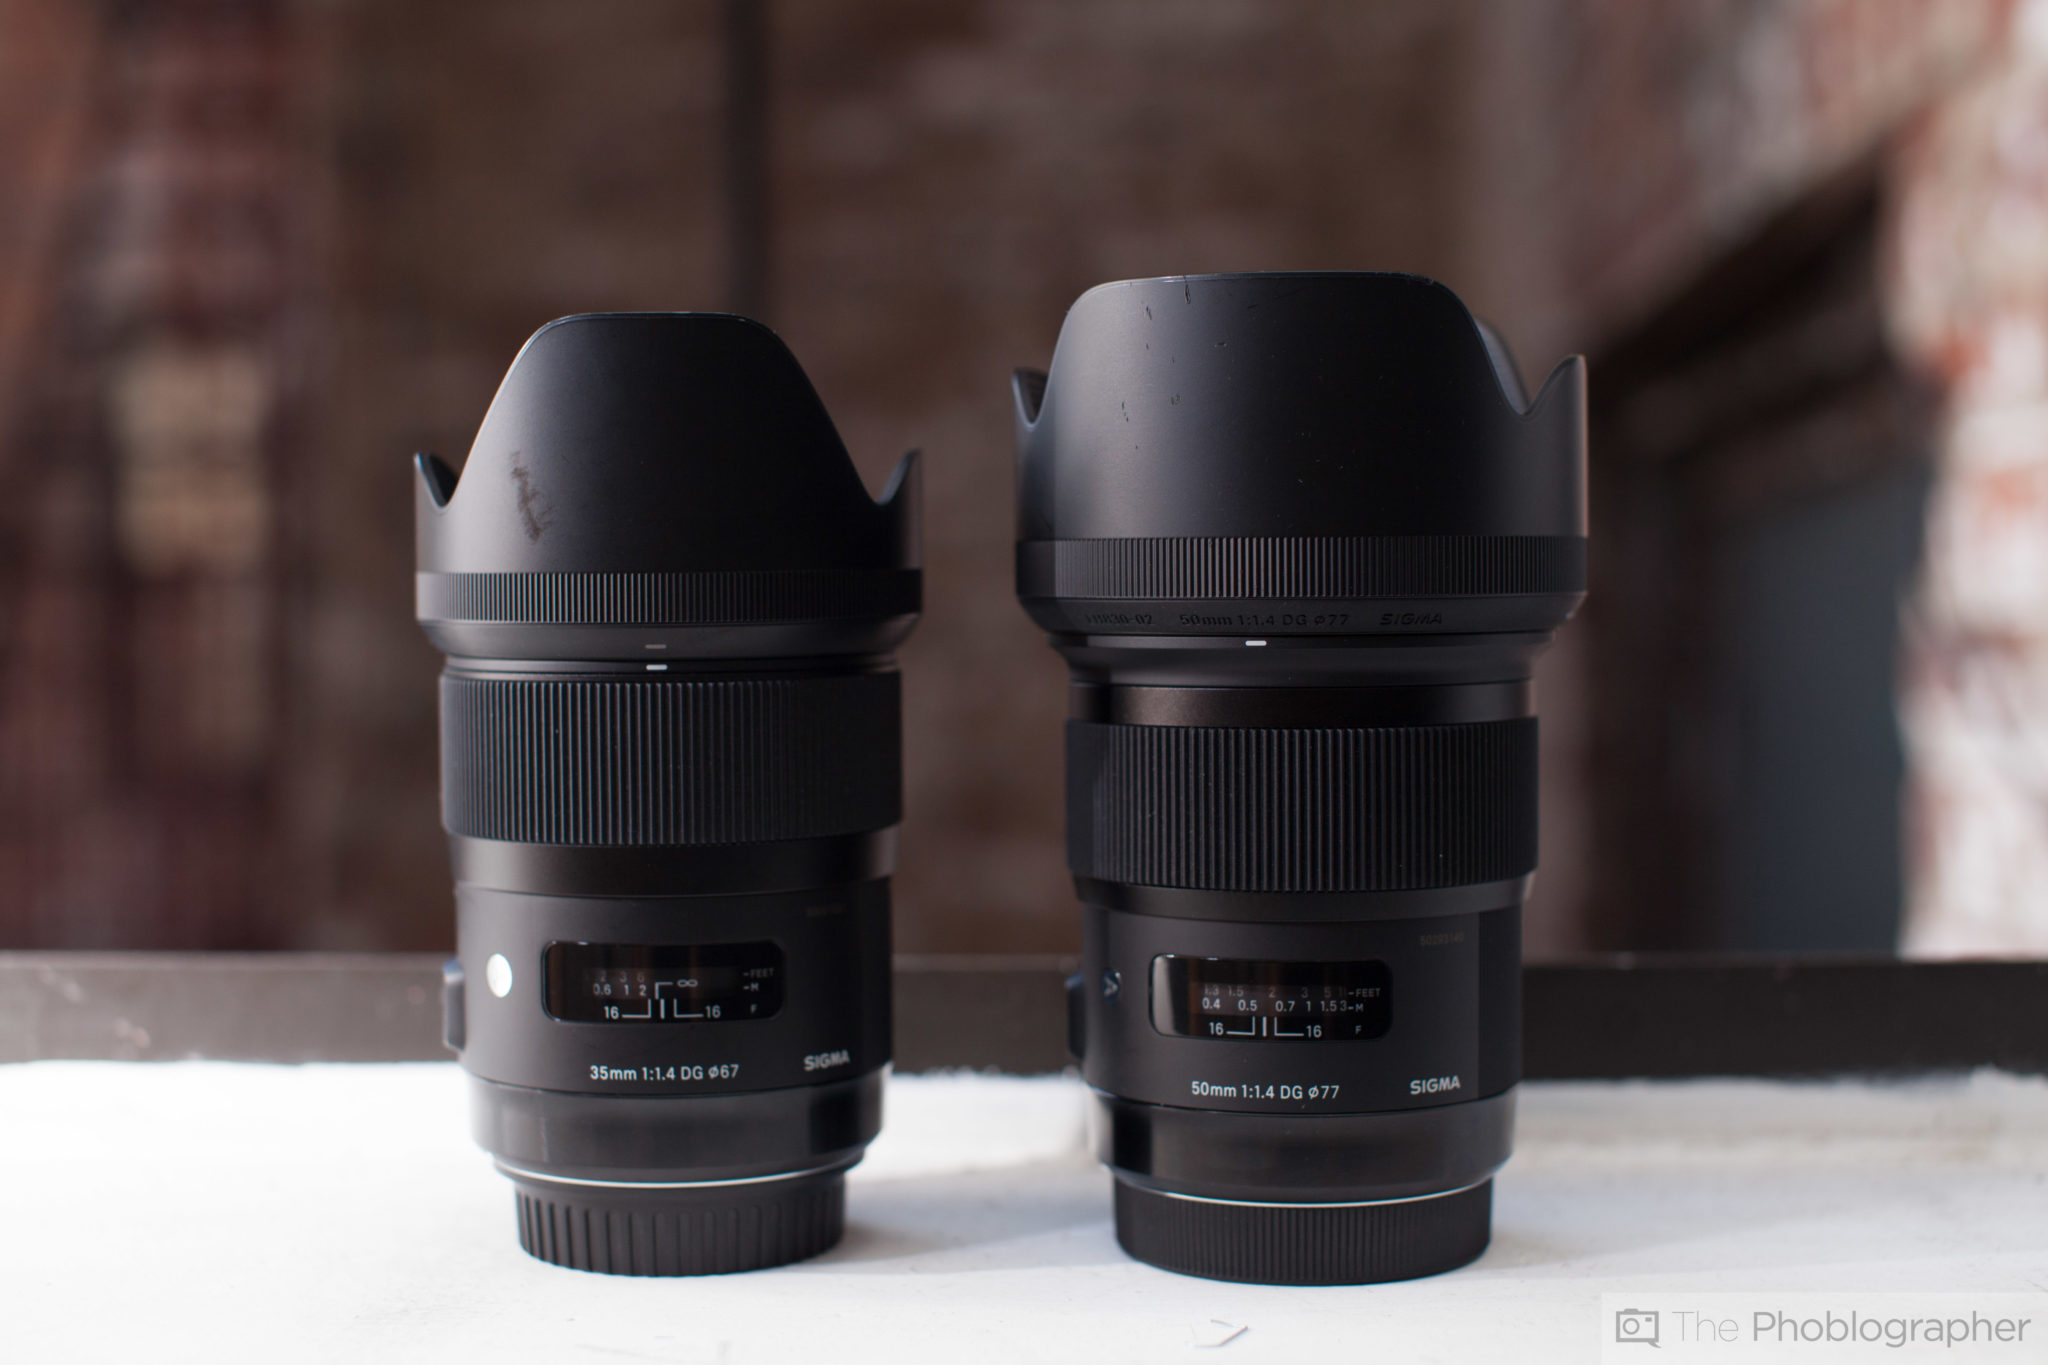 Which One? Sigma 50mm f1.4 DG HSM Art or 35mm f1.4 DG HSM Art - The